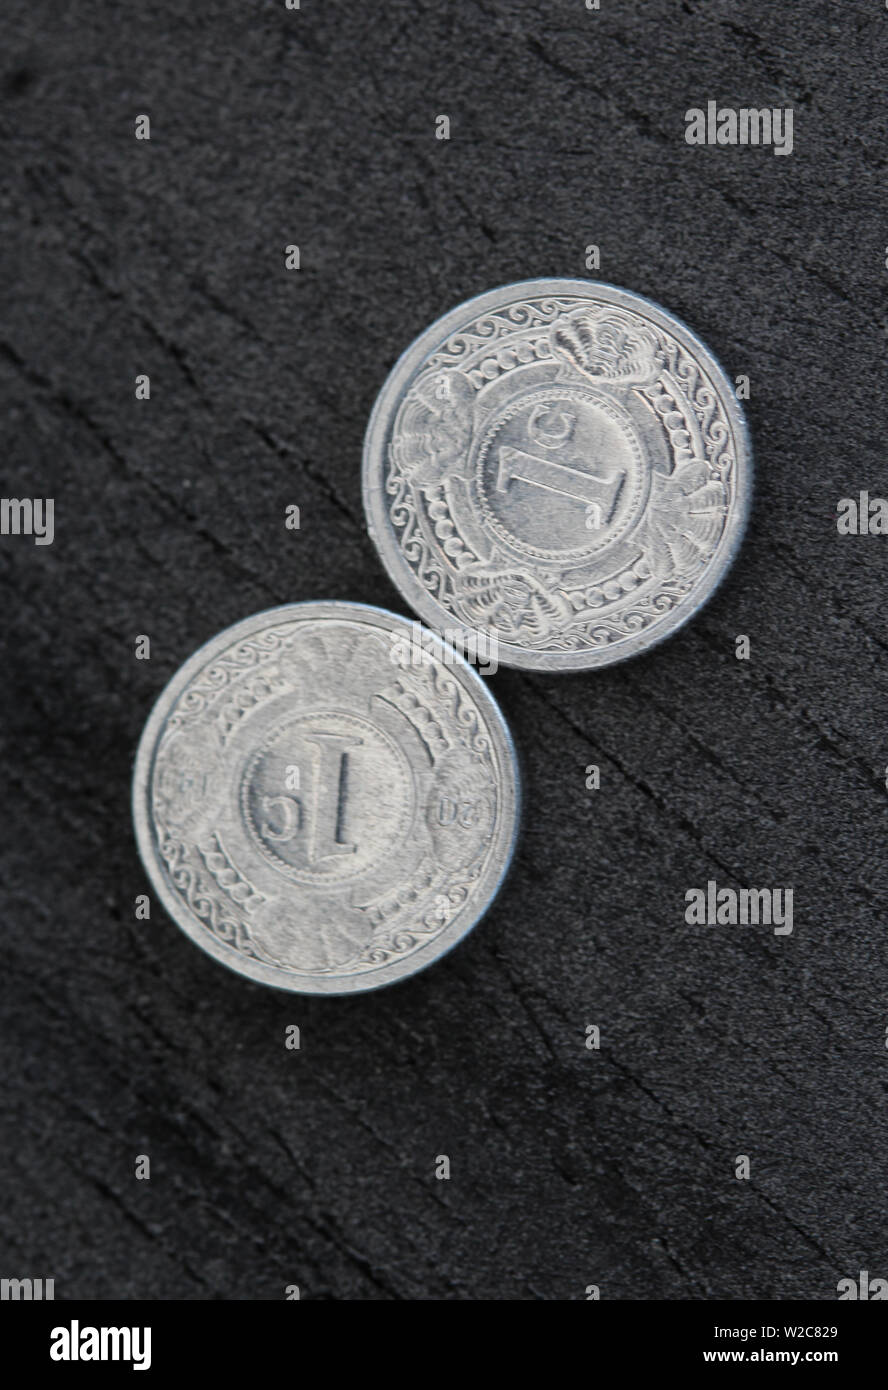 close up of 10 (ten) cent Netherlands Antillean guilder coin on black background Stock Photo